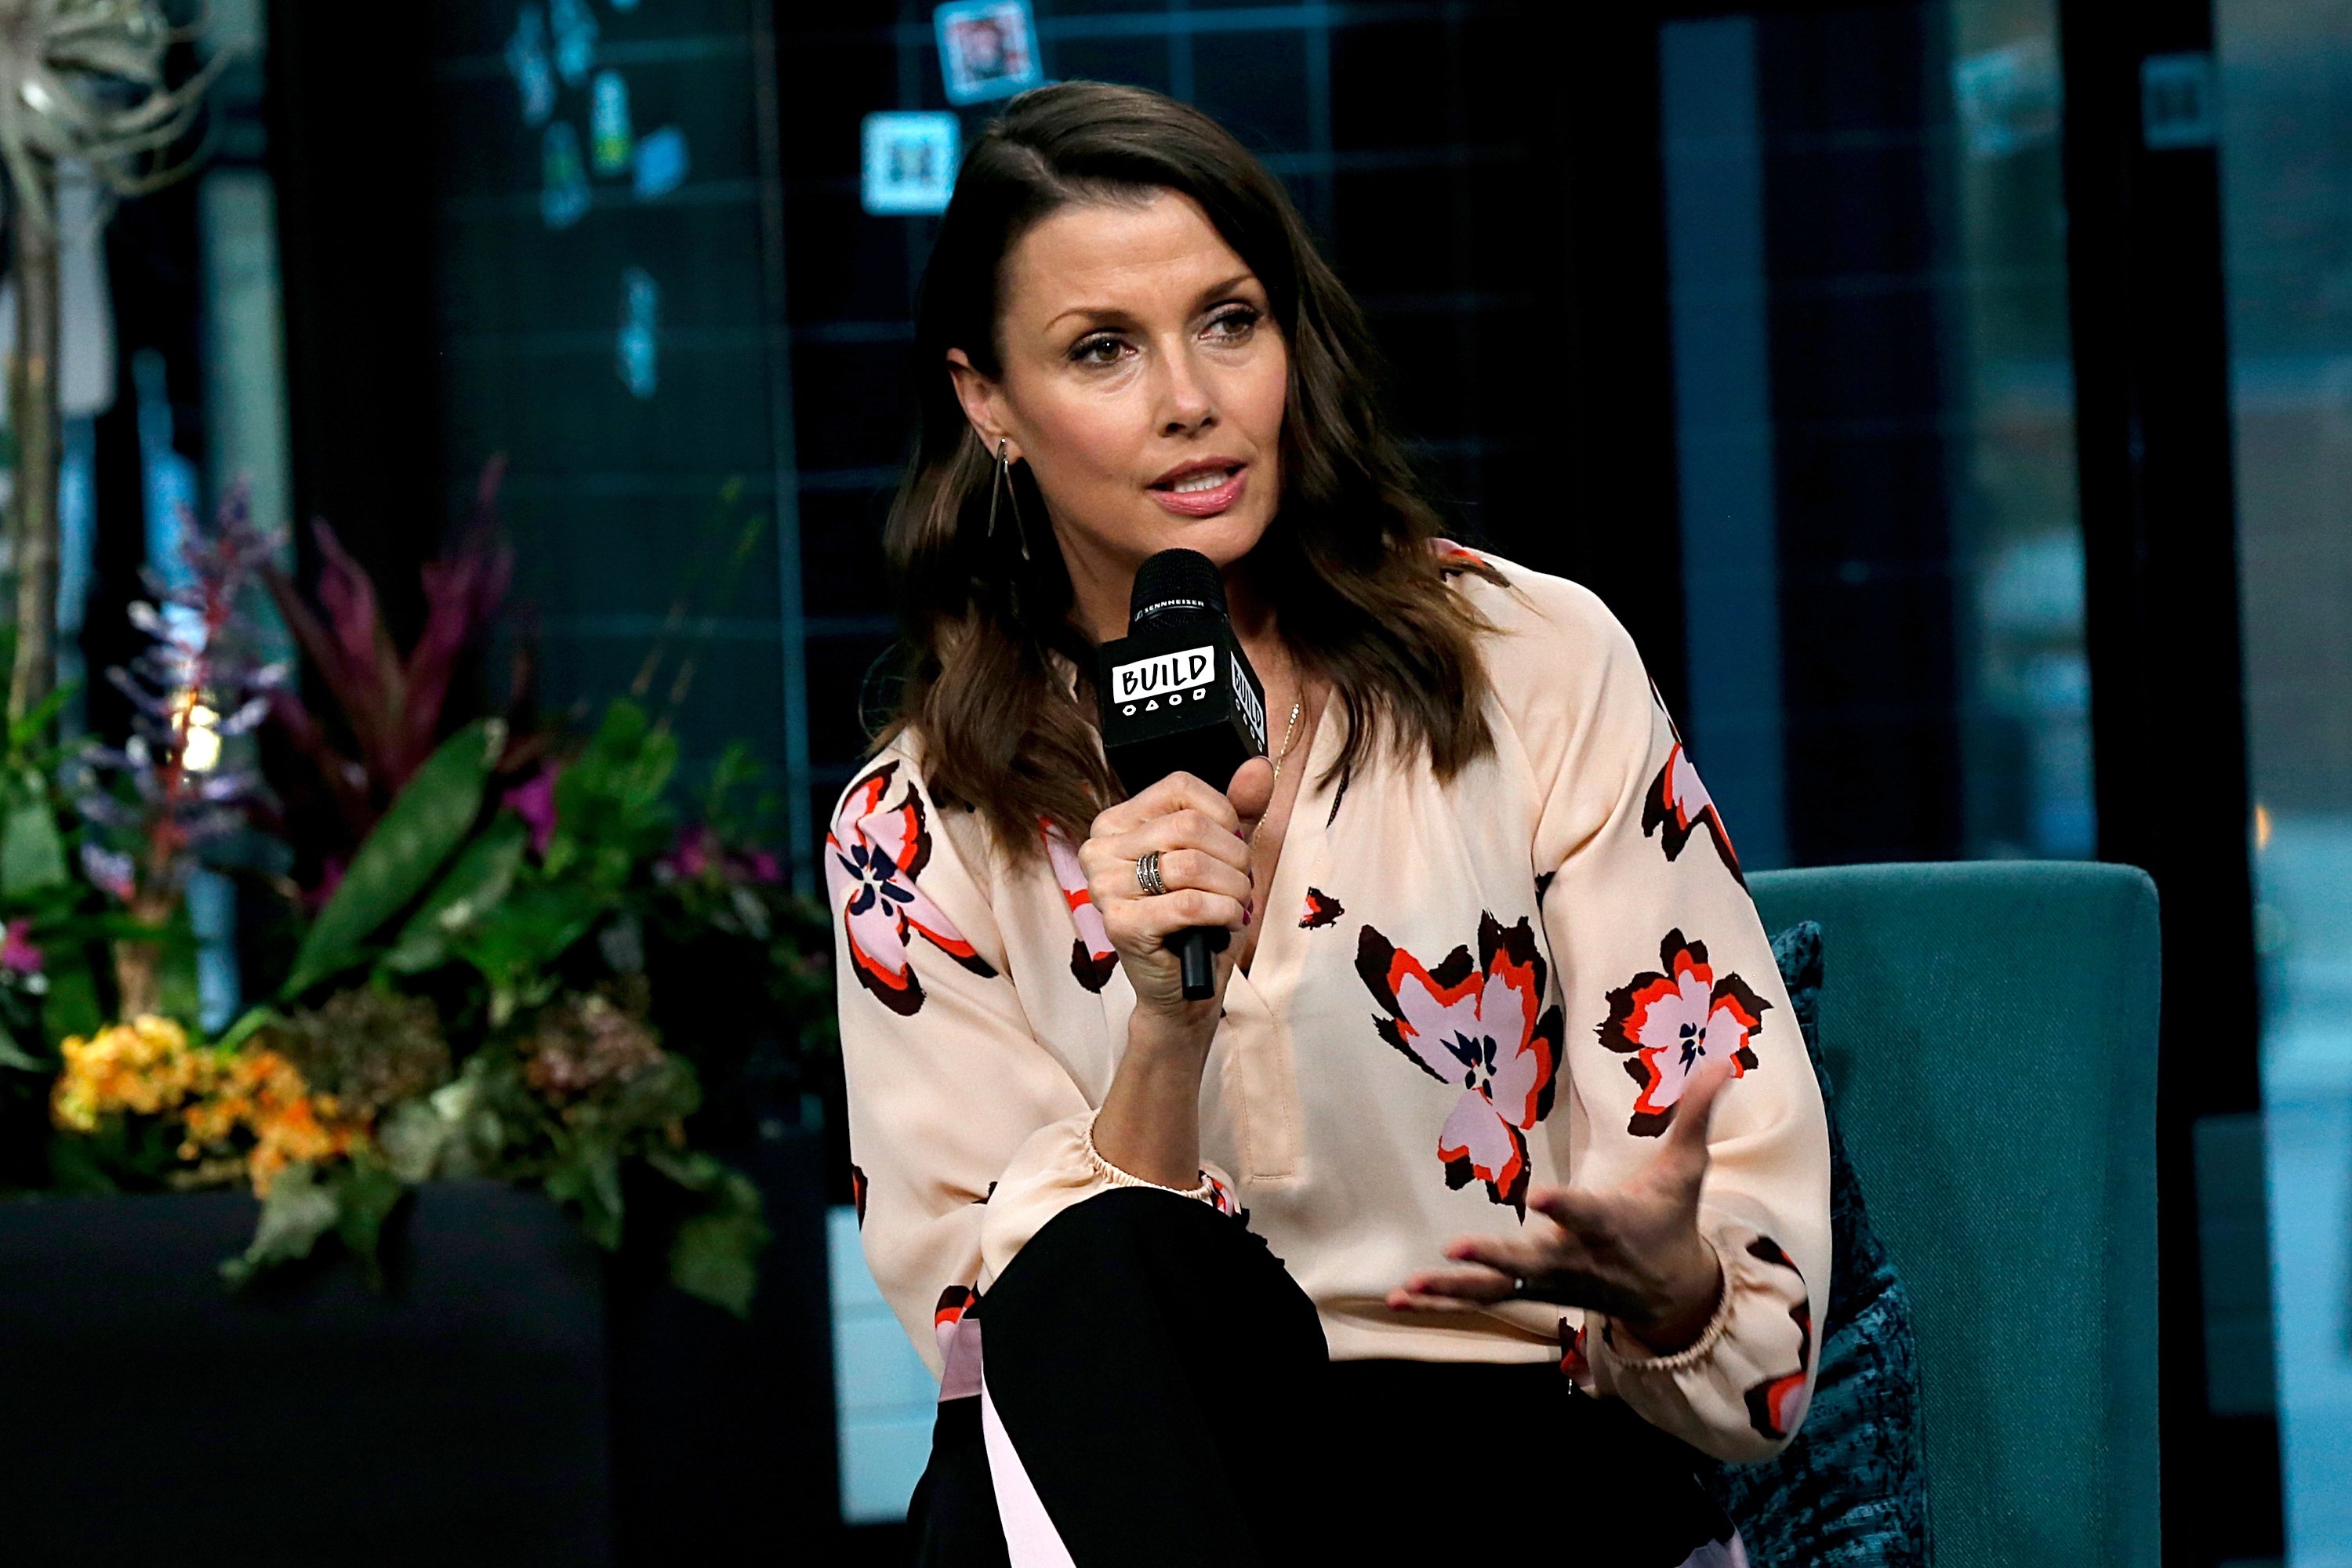  Bridget Moynahan attends the Build Series to discuss 'Our Shoes, Our Selves' at Build Studio on April 17, 2019 in New York City | Photo: GettyImages